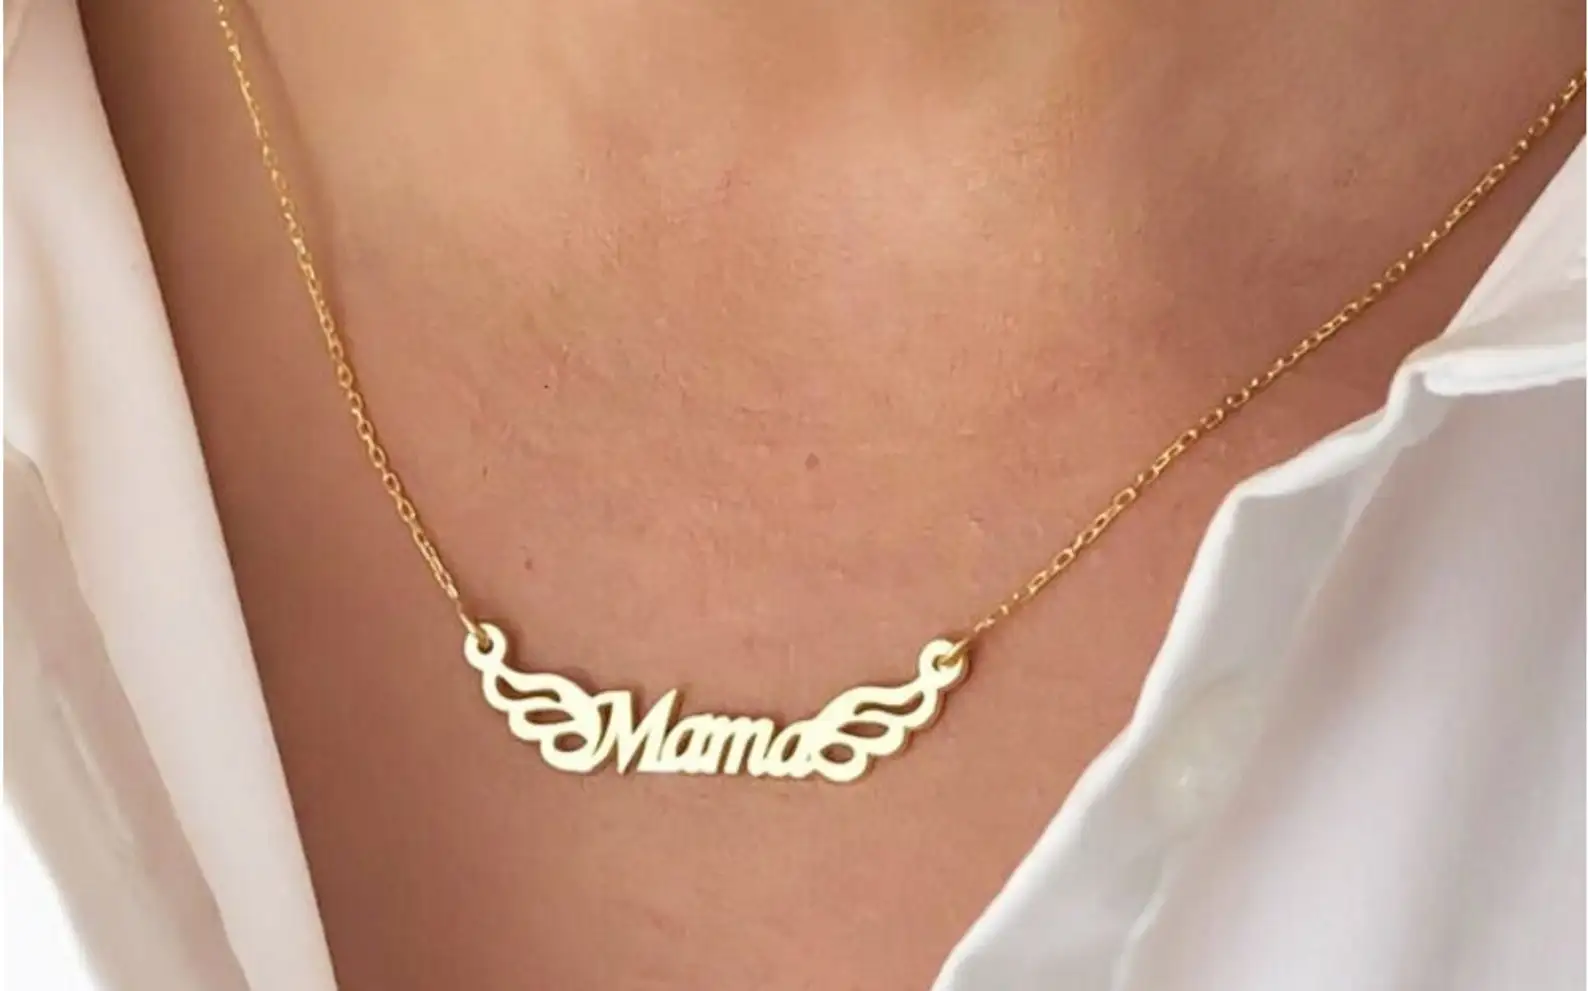 

Cute Angel Wings Necklace Custom Name Necklace Pendant Stainless Steel Personalized Nameplate Choker Women Girl Jewelry Gift